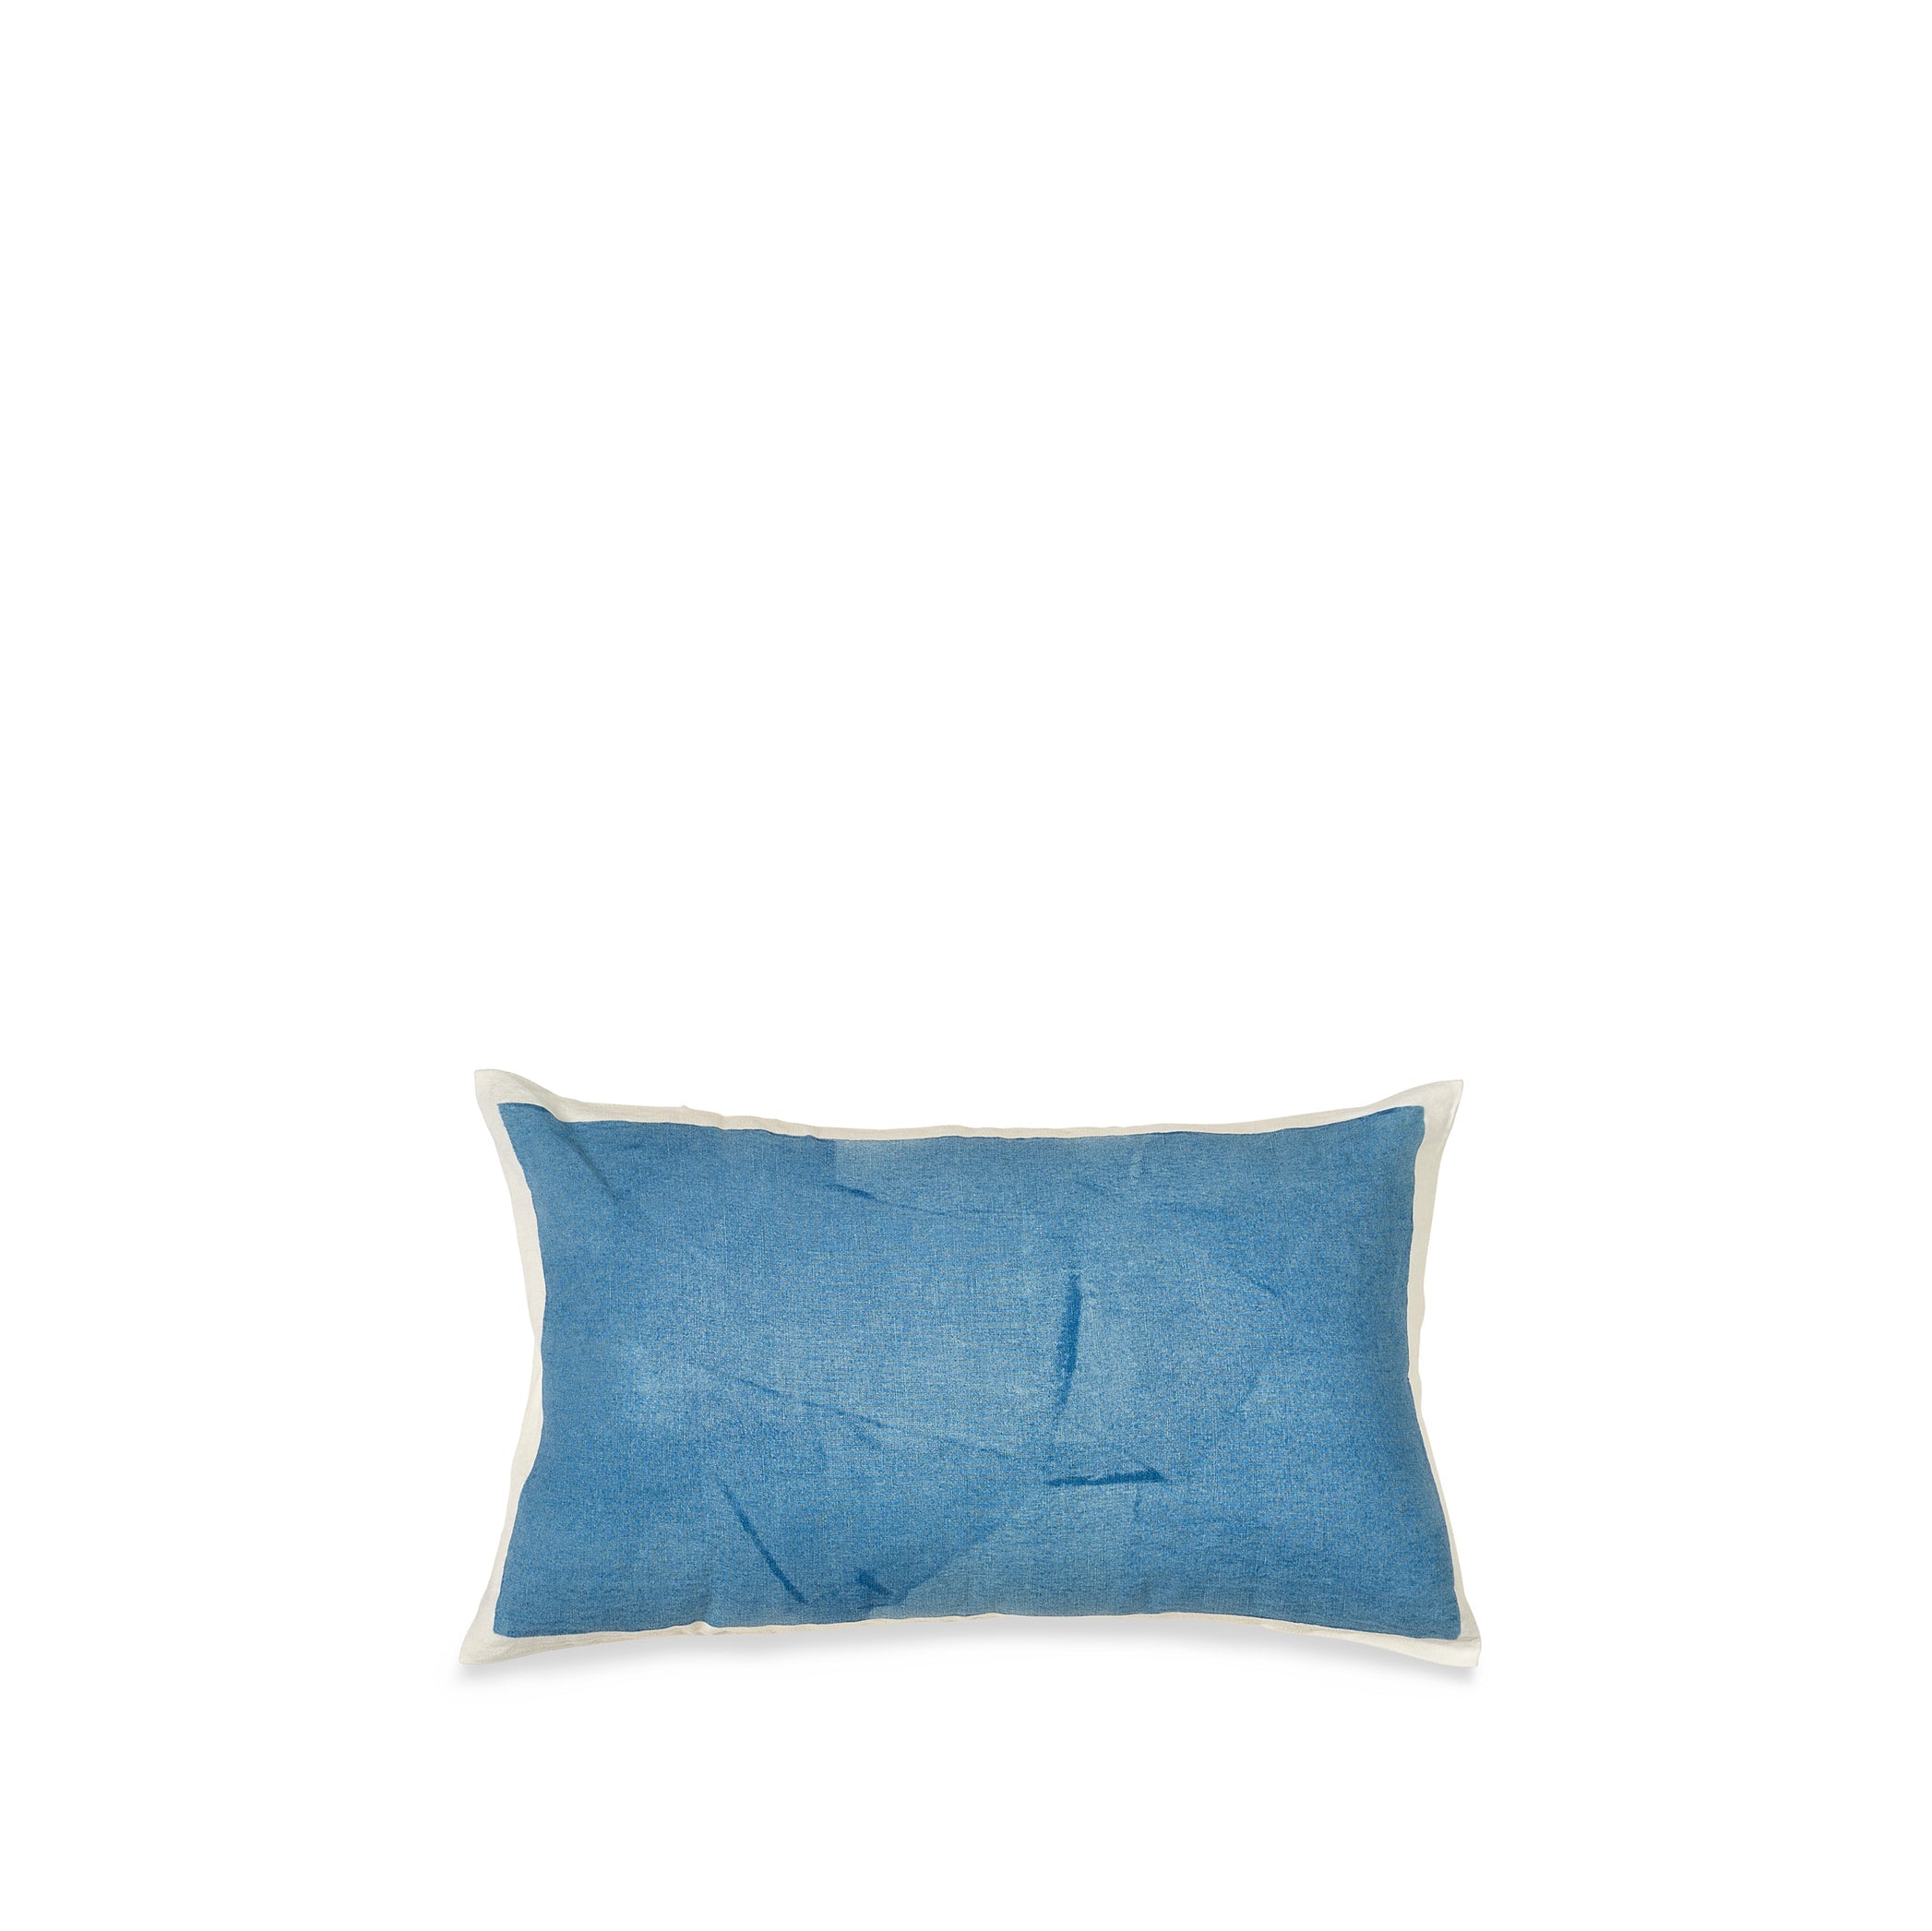 Hand Painted Linen Cushion in Sky Blue, 50cm x 30cm